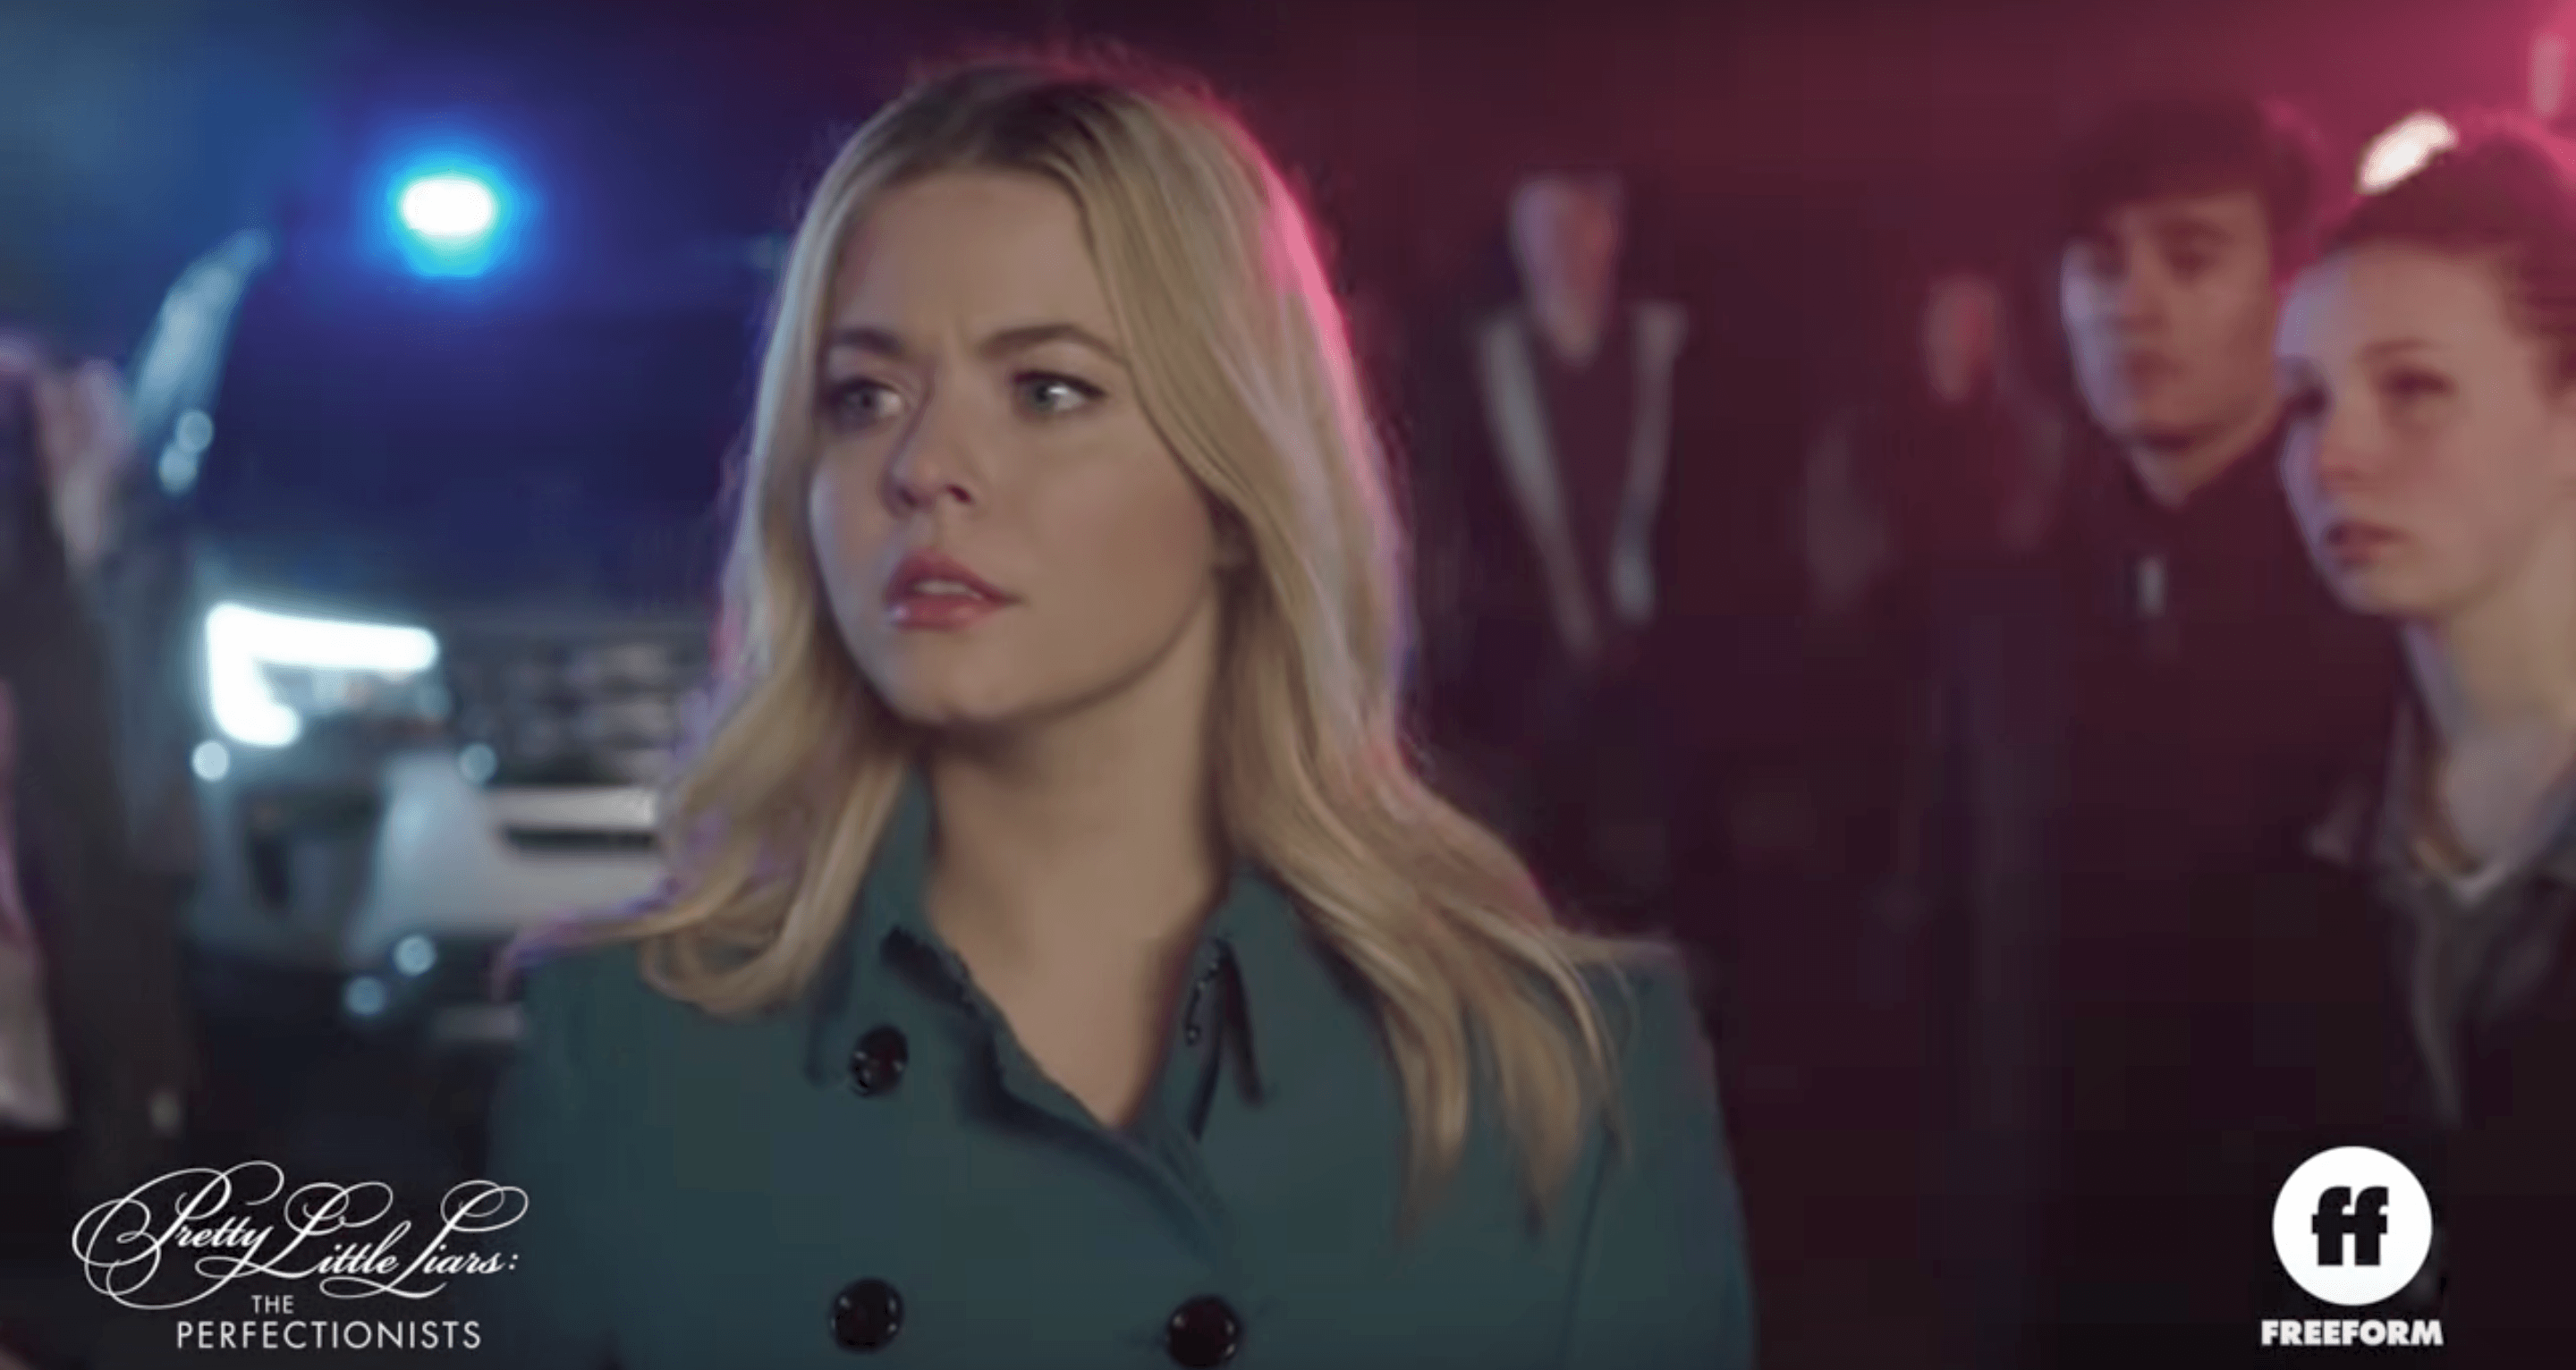 First look at Pretty Little Liars spinoff Perfectionists brings back